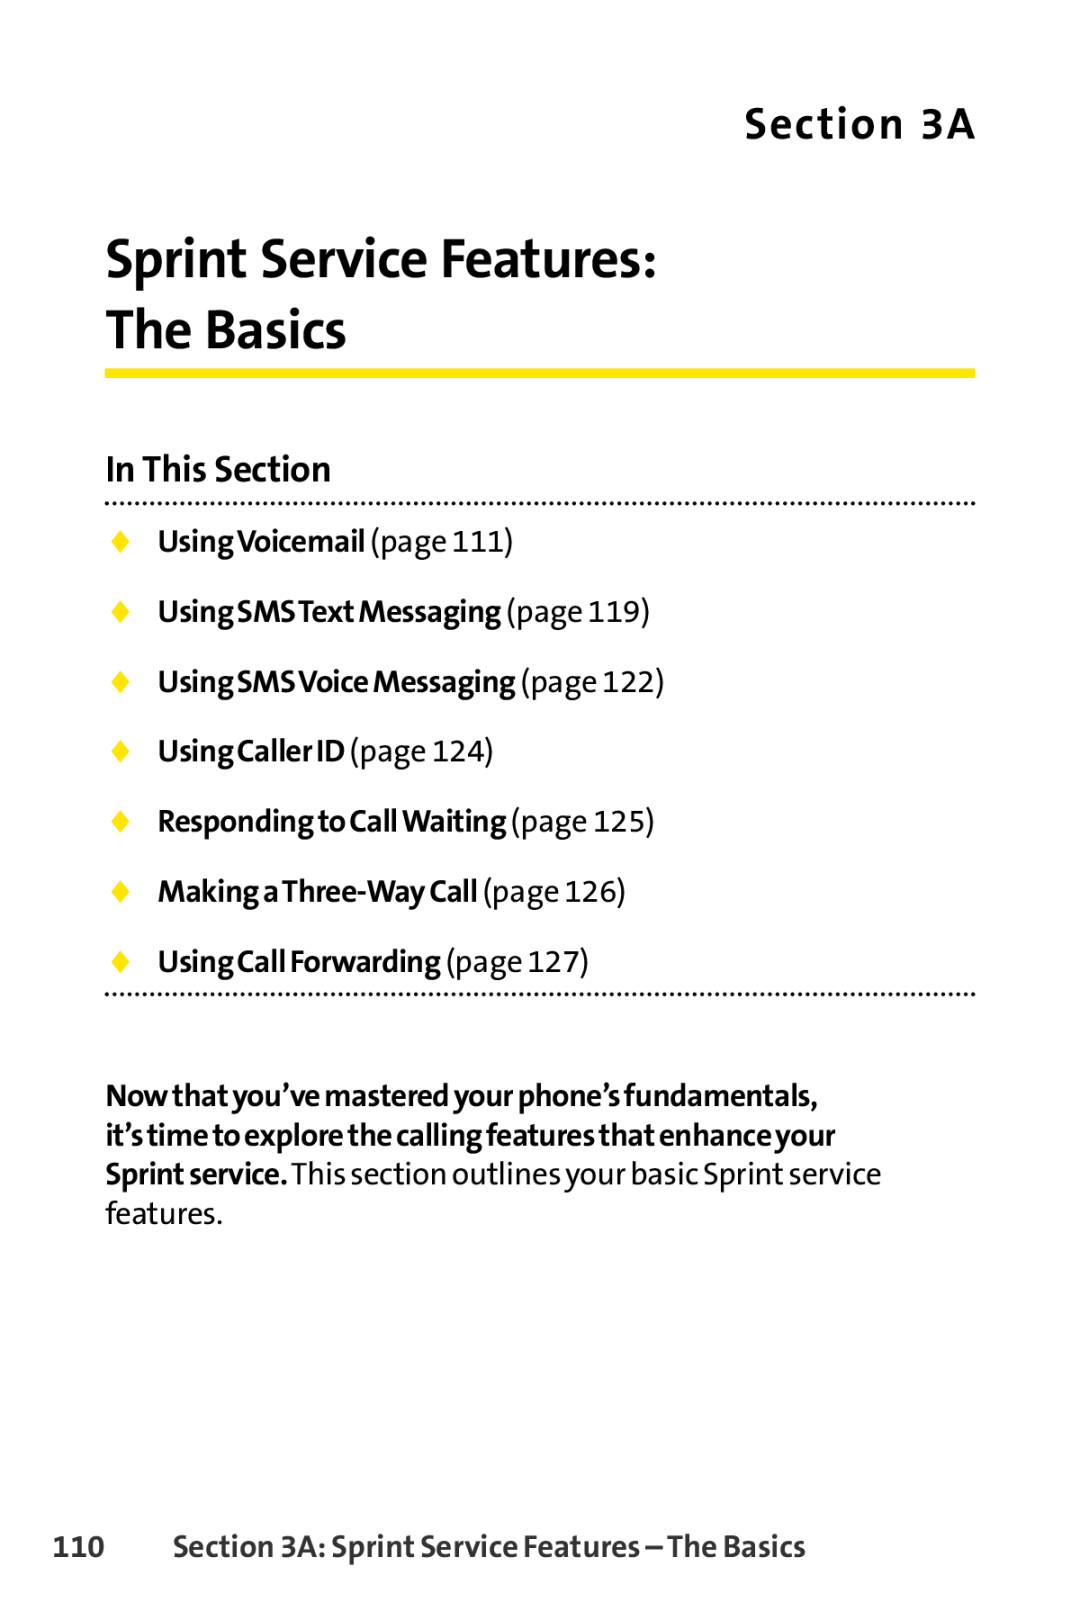 Sprint Nextel LX160 manual Sprint Service Features The Basics, A,  UsingVoicemail page  UsingSMSTextMessaging page 